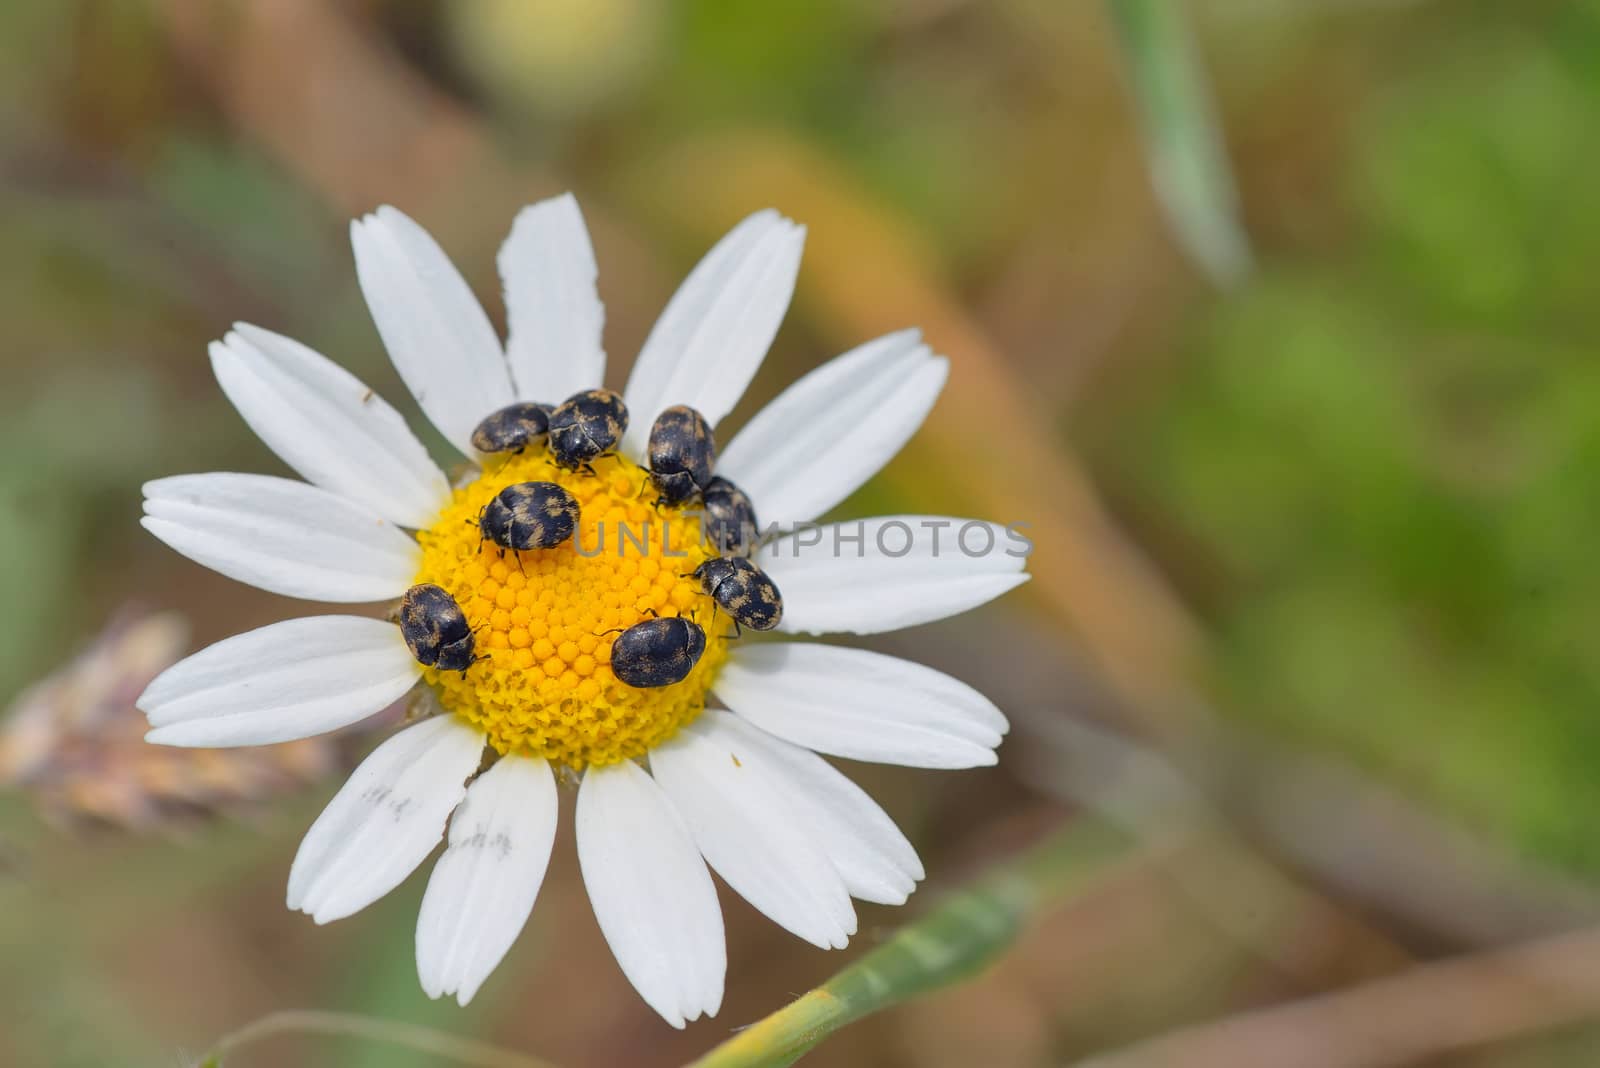 Details of chamomile flower and small bugs